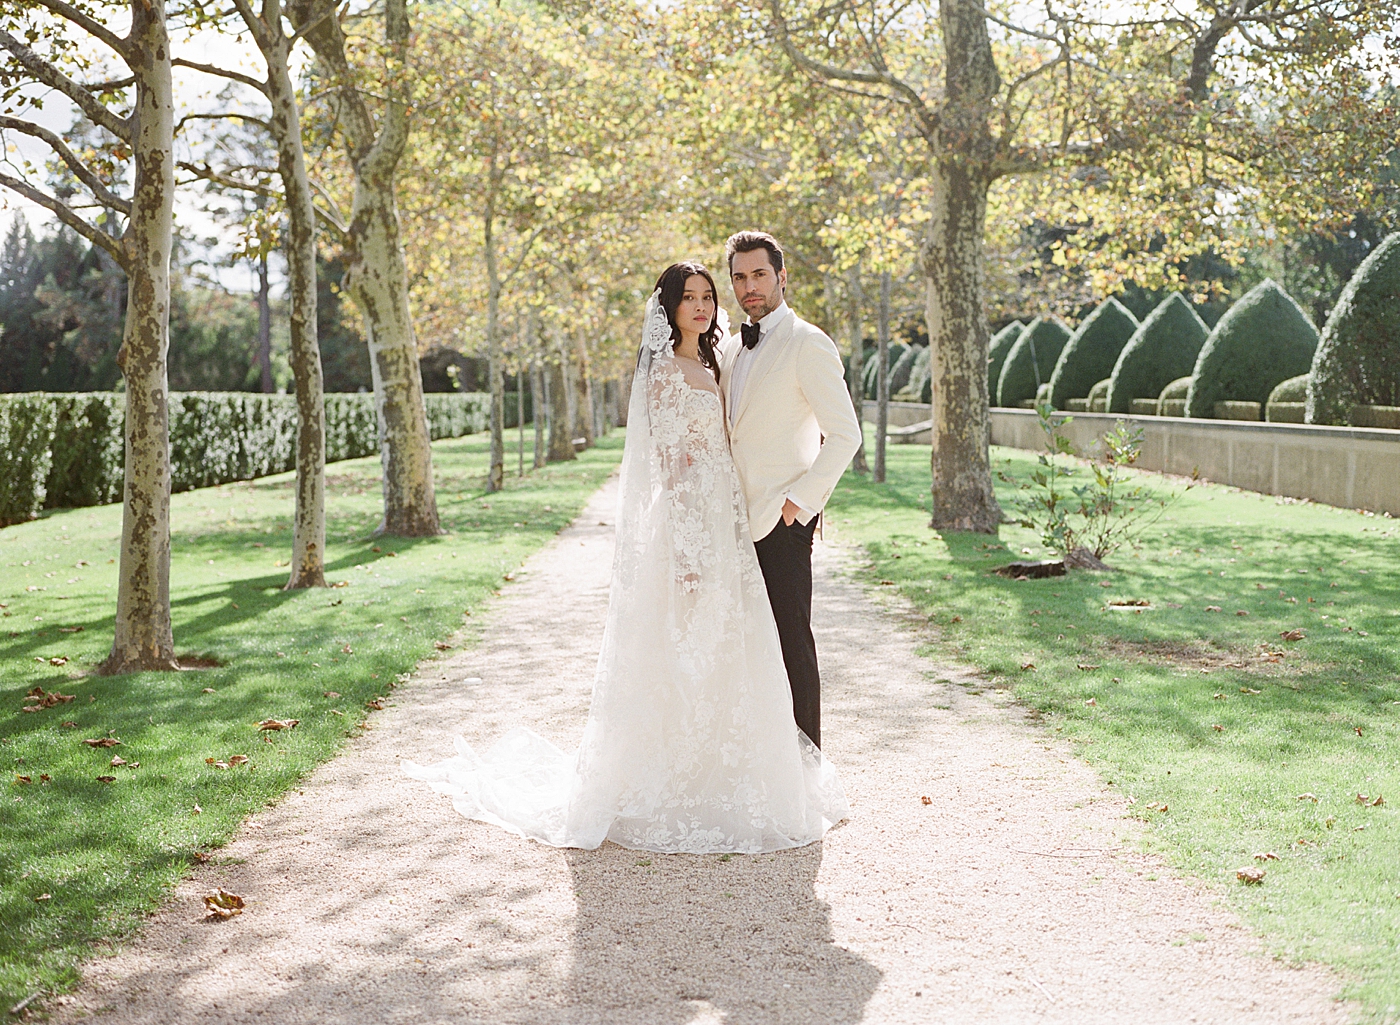 Portrait of bride and groom at the end of a tree-lined driveway during Oheka castle wedding | Image by Hope Helmuth Photography